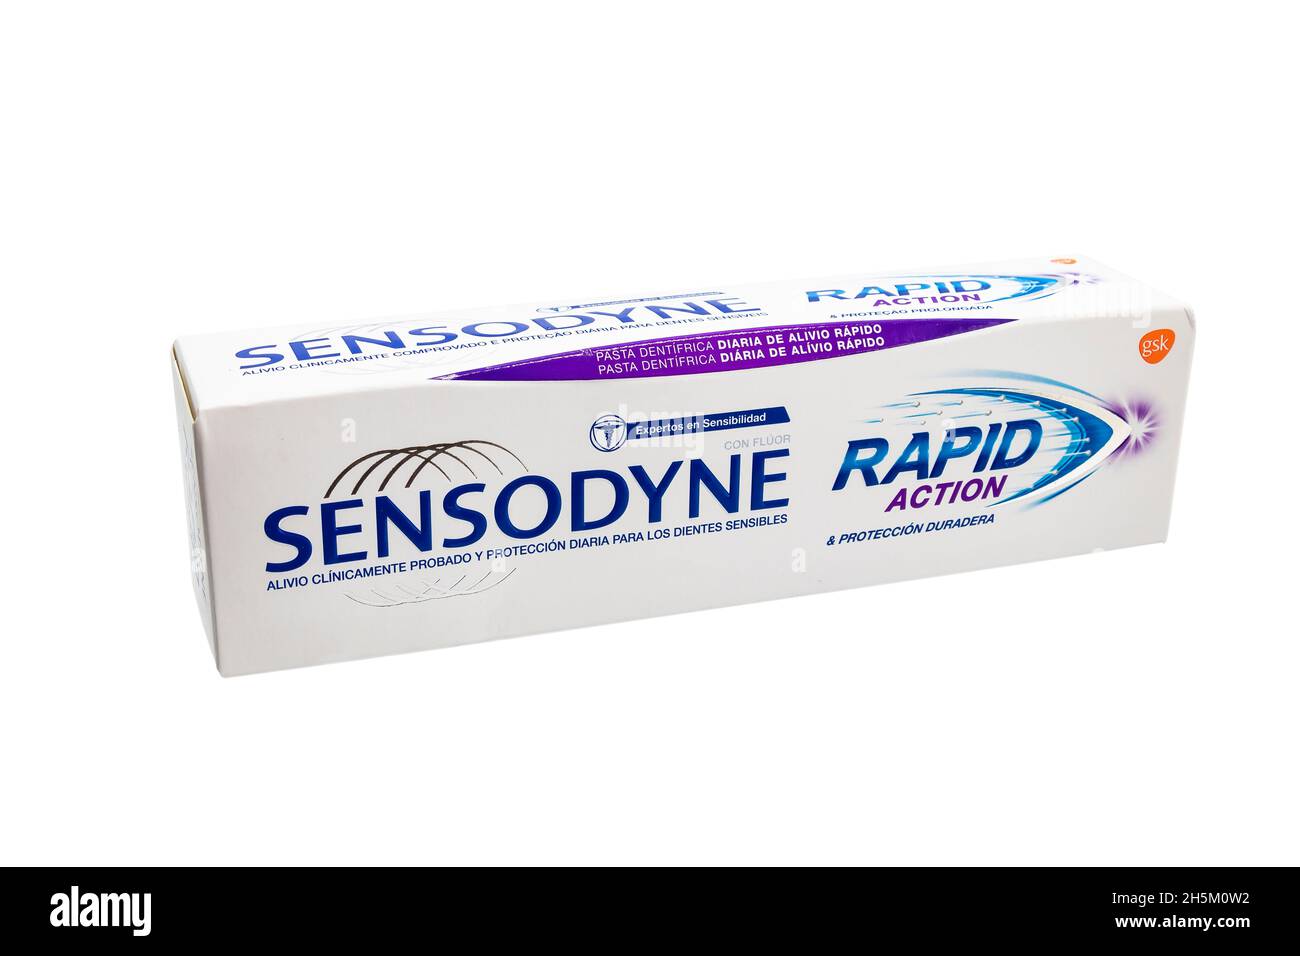 Huelva, Spain-November 5, 2021: Spanish box of Sensodyne toothpaste. It is a brand name of toothpaste and mouthwash targeted at people with sensitive Stock Photo